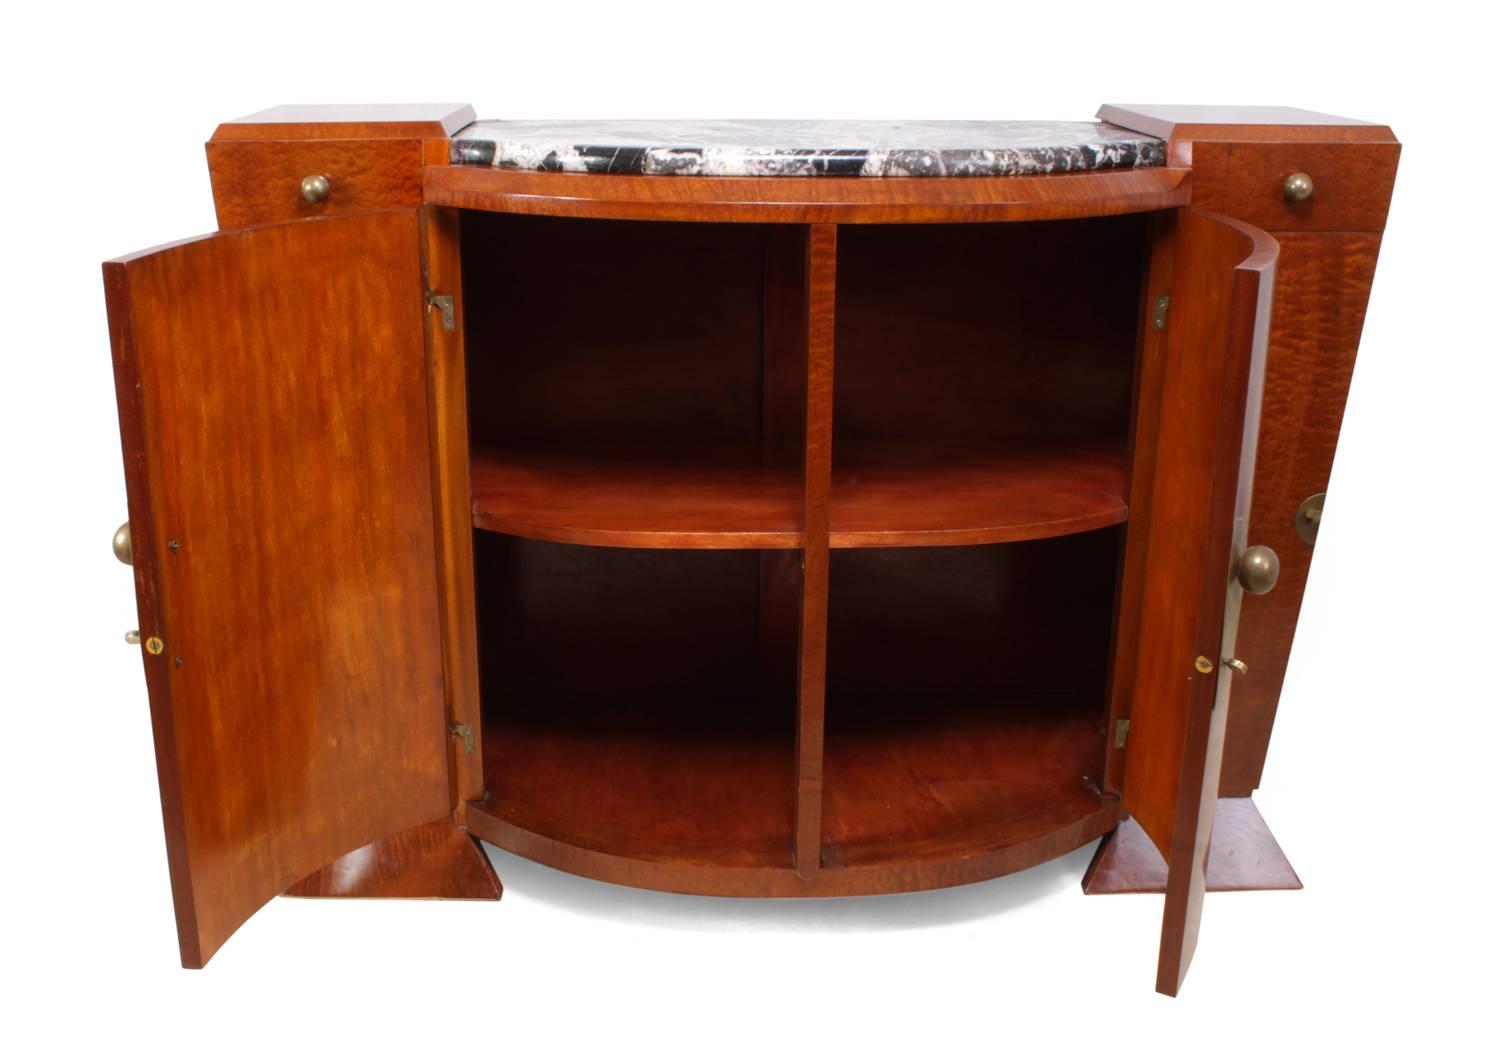 Early 20th Century French Art Deco Sideboard, circa 1920